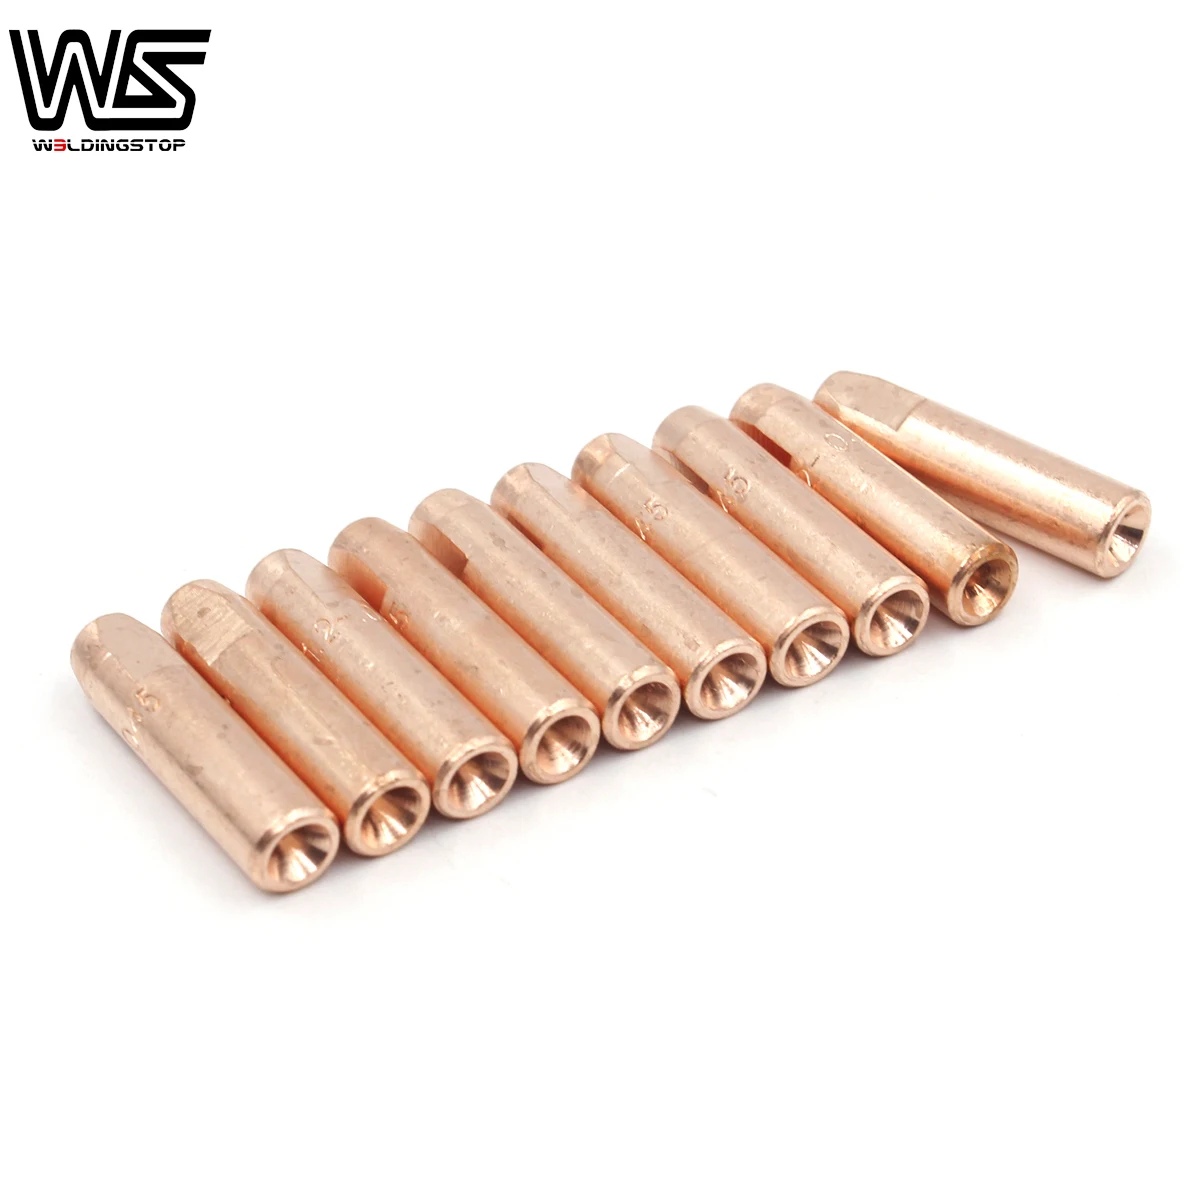 0.045 for Elliptical Consumables in Bernard Q and S MIG Guns WeldingCity 10-pk MIG Welding Contact Tip 7490 